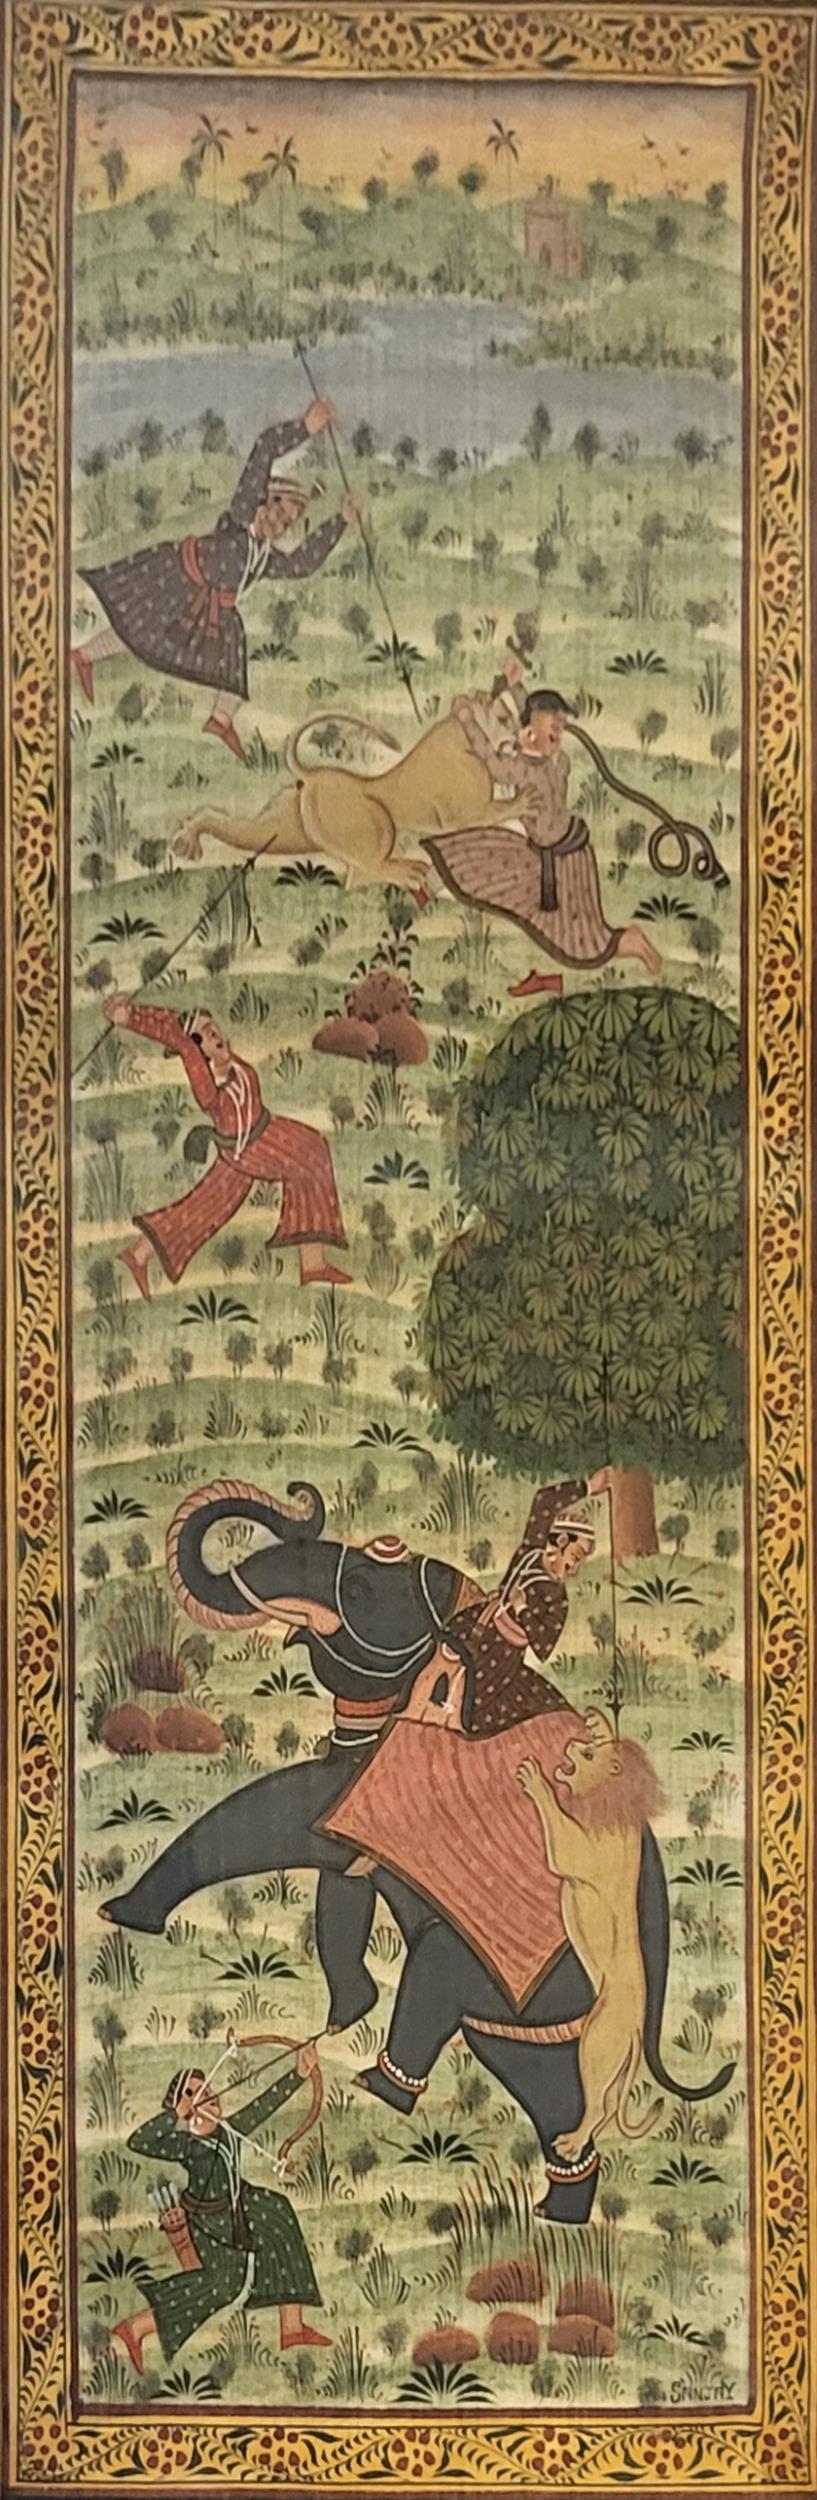 A 20TH CENTURY INDIAN SILK PAINTING, DEPICTING ORNATELY DRESSED NATIVES BATTLING A LION AND TIGER - Image 3 of 7